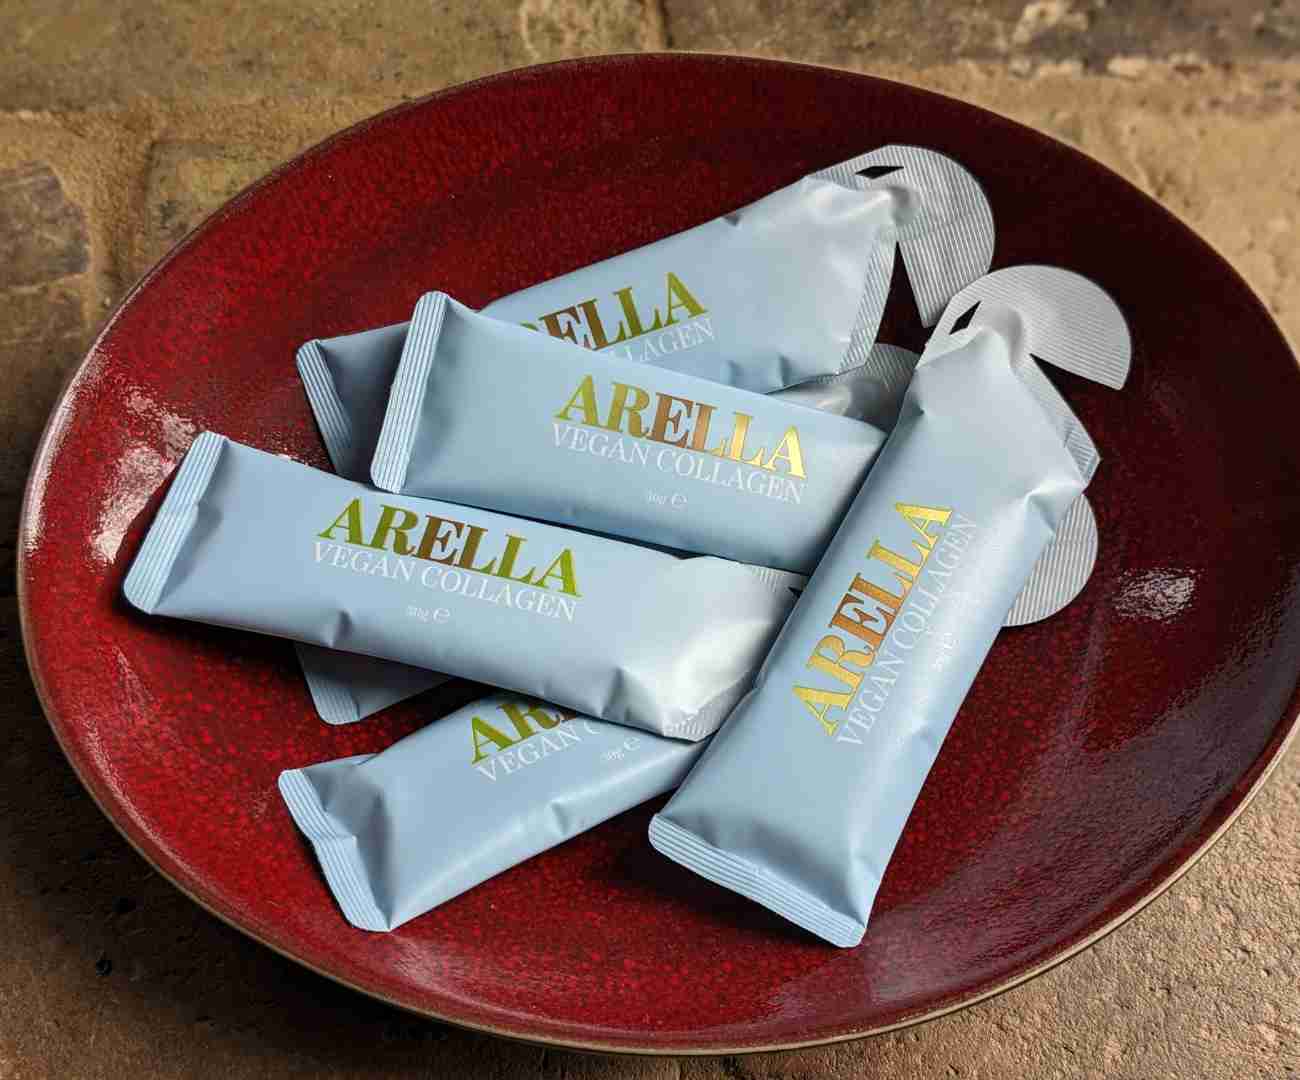 6 pale blue sachets of Arella vegan liquid collagen with gold and white lettering depicting the brand and the contents. The sachets are scattered in a deep red, oval ceramic bowl which is standing on a sand coloured brick floor